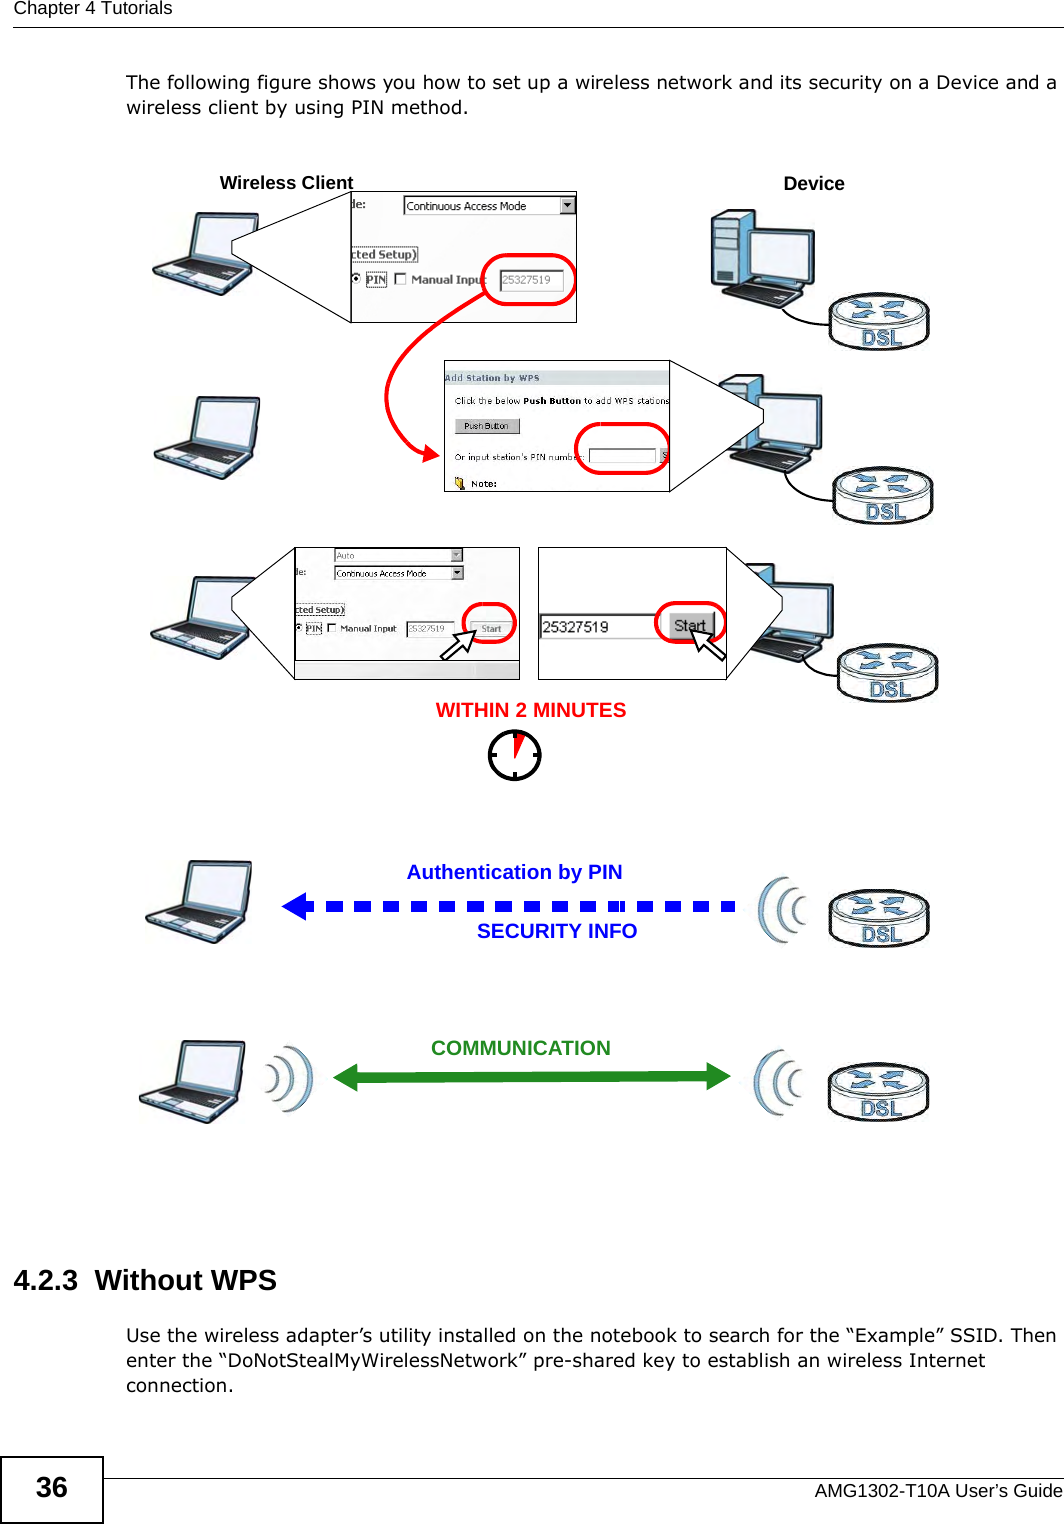 Chapter 4 TutorialsAMG1302-T10A User’s Guide36The following figure shows you how to set up a wireless network and its security on a Device and a wireless client by using PIN method. Example WPS Process: PIN Method4.2.3  Without WPSUse the wireless adapter’s utility installed on the notebook to search for the “Example” SSID. Then enter the “DoNotStealMyWirelessNetwork” pre-shared key to establish an wireless Internet connection.Authentication by PINSECURITY INFOWITHIN 2 MINUTESWireless ClientDeviceCOMMUNICATION